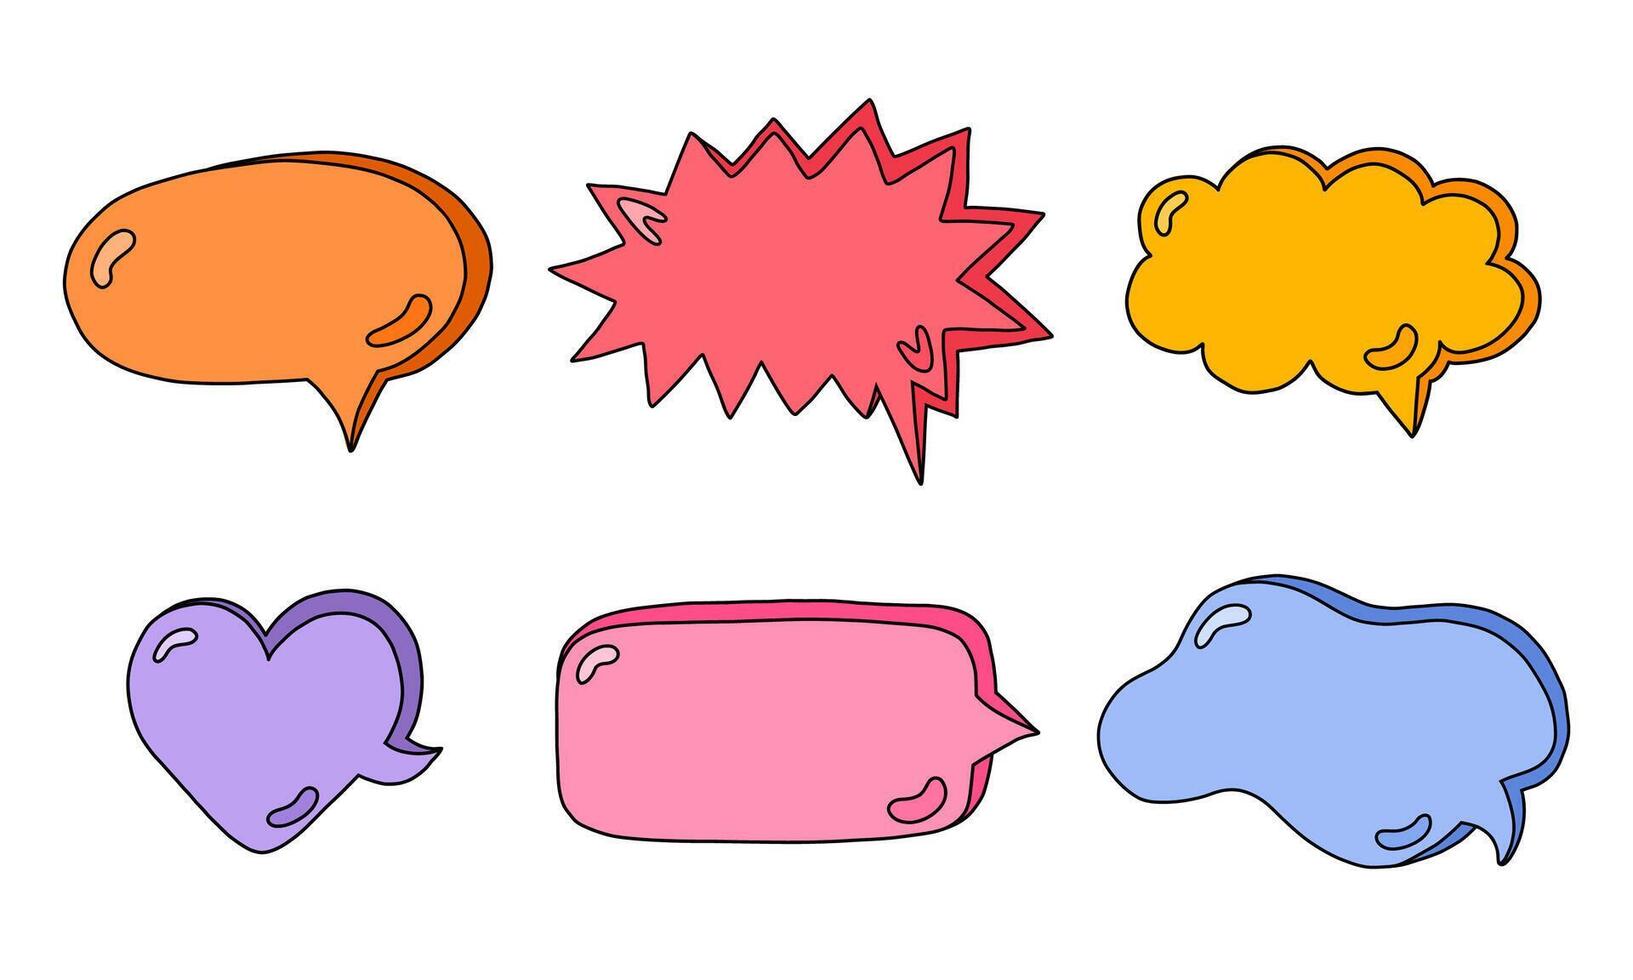 Hand drawn speech bubbles set. Empty online chat clouds in the different shapes. Oval, round, square, cloud, heart shaped bubbles for text, talk phrases, information. Colorful isolated doodles. vector